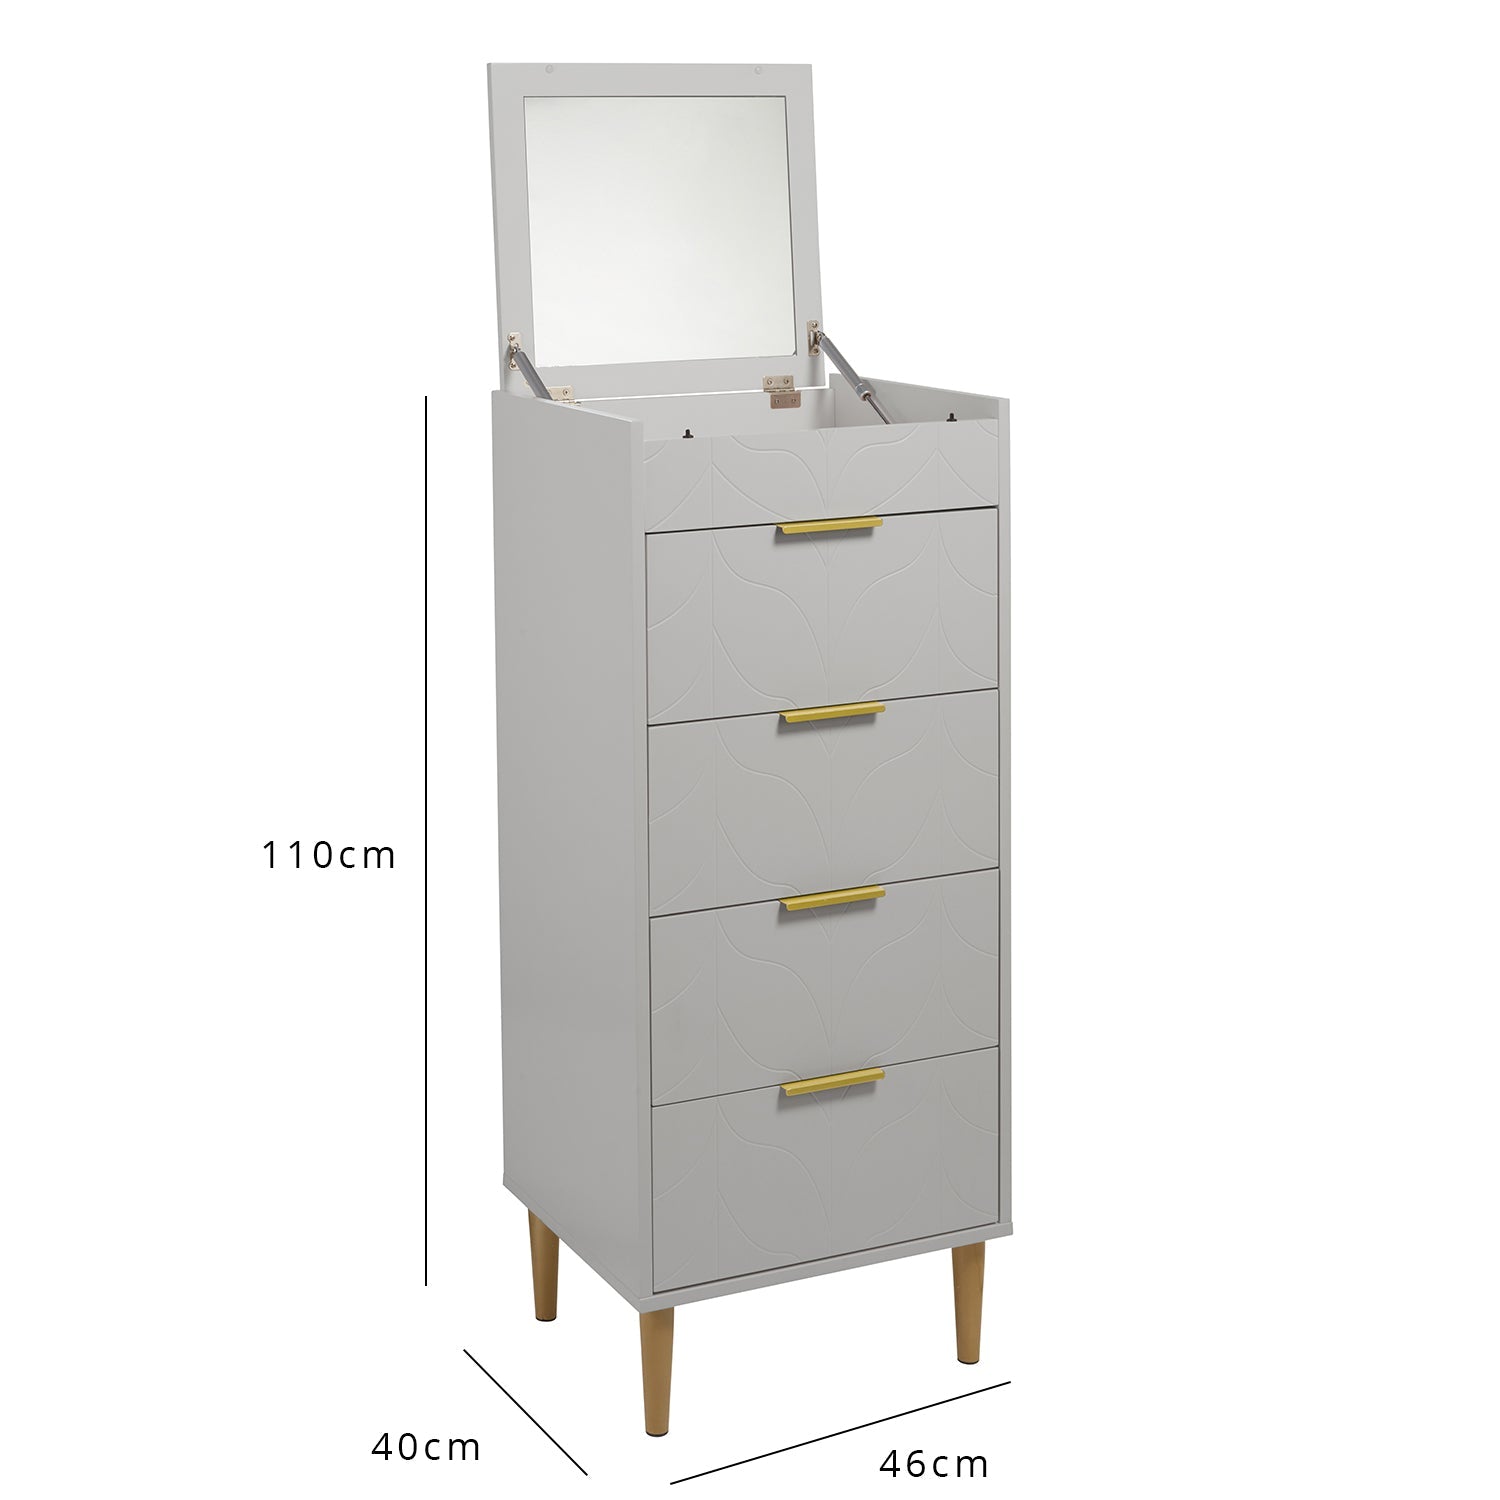 Gloria wardrobe and drawers set - 4 over 4 chest of drawers - grey